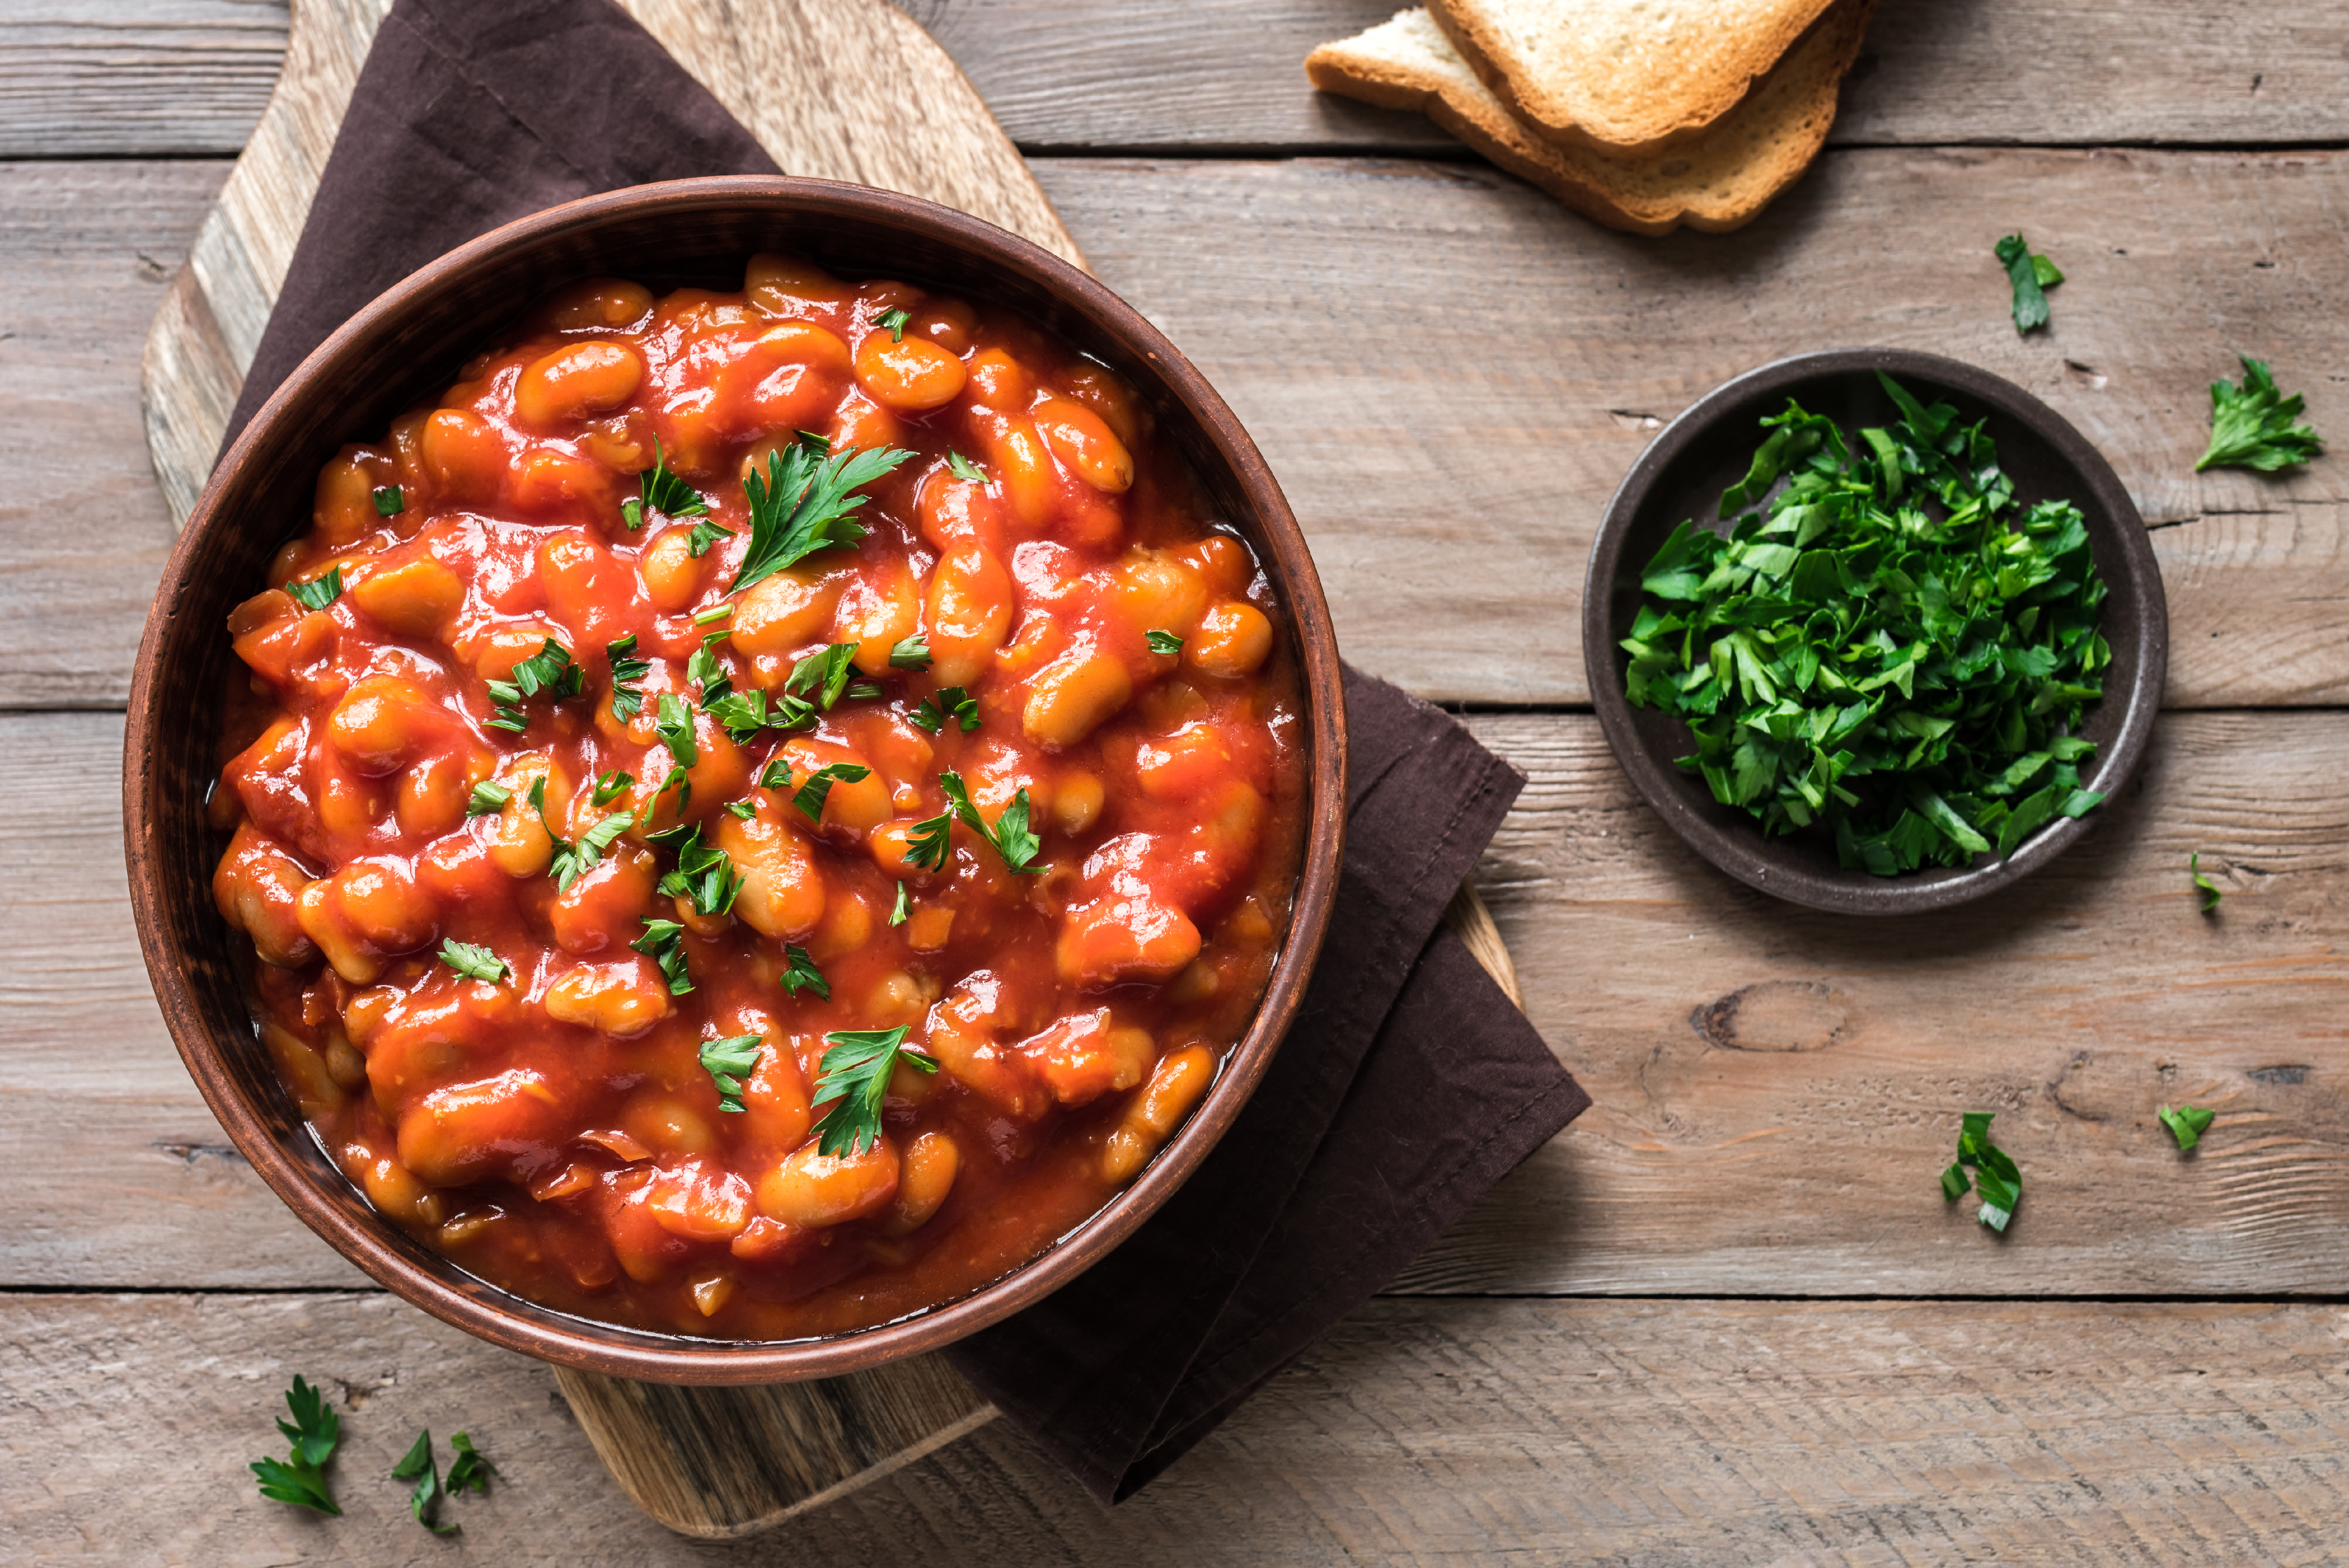 Vegetarian recipe with kidney beans and vegetables. | Source: Shutterstock